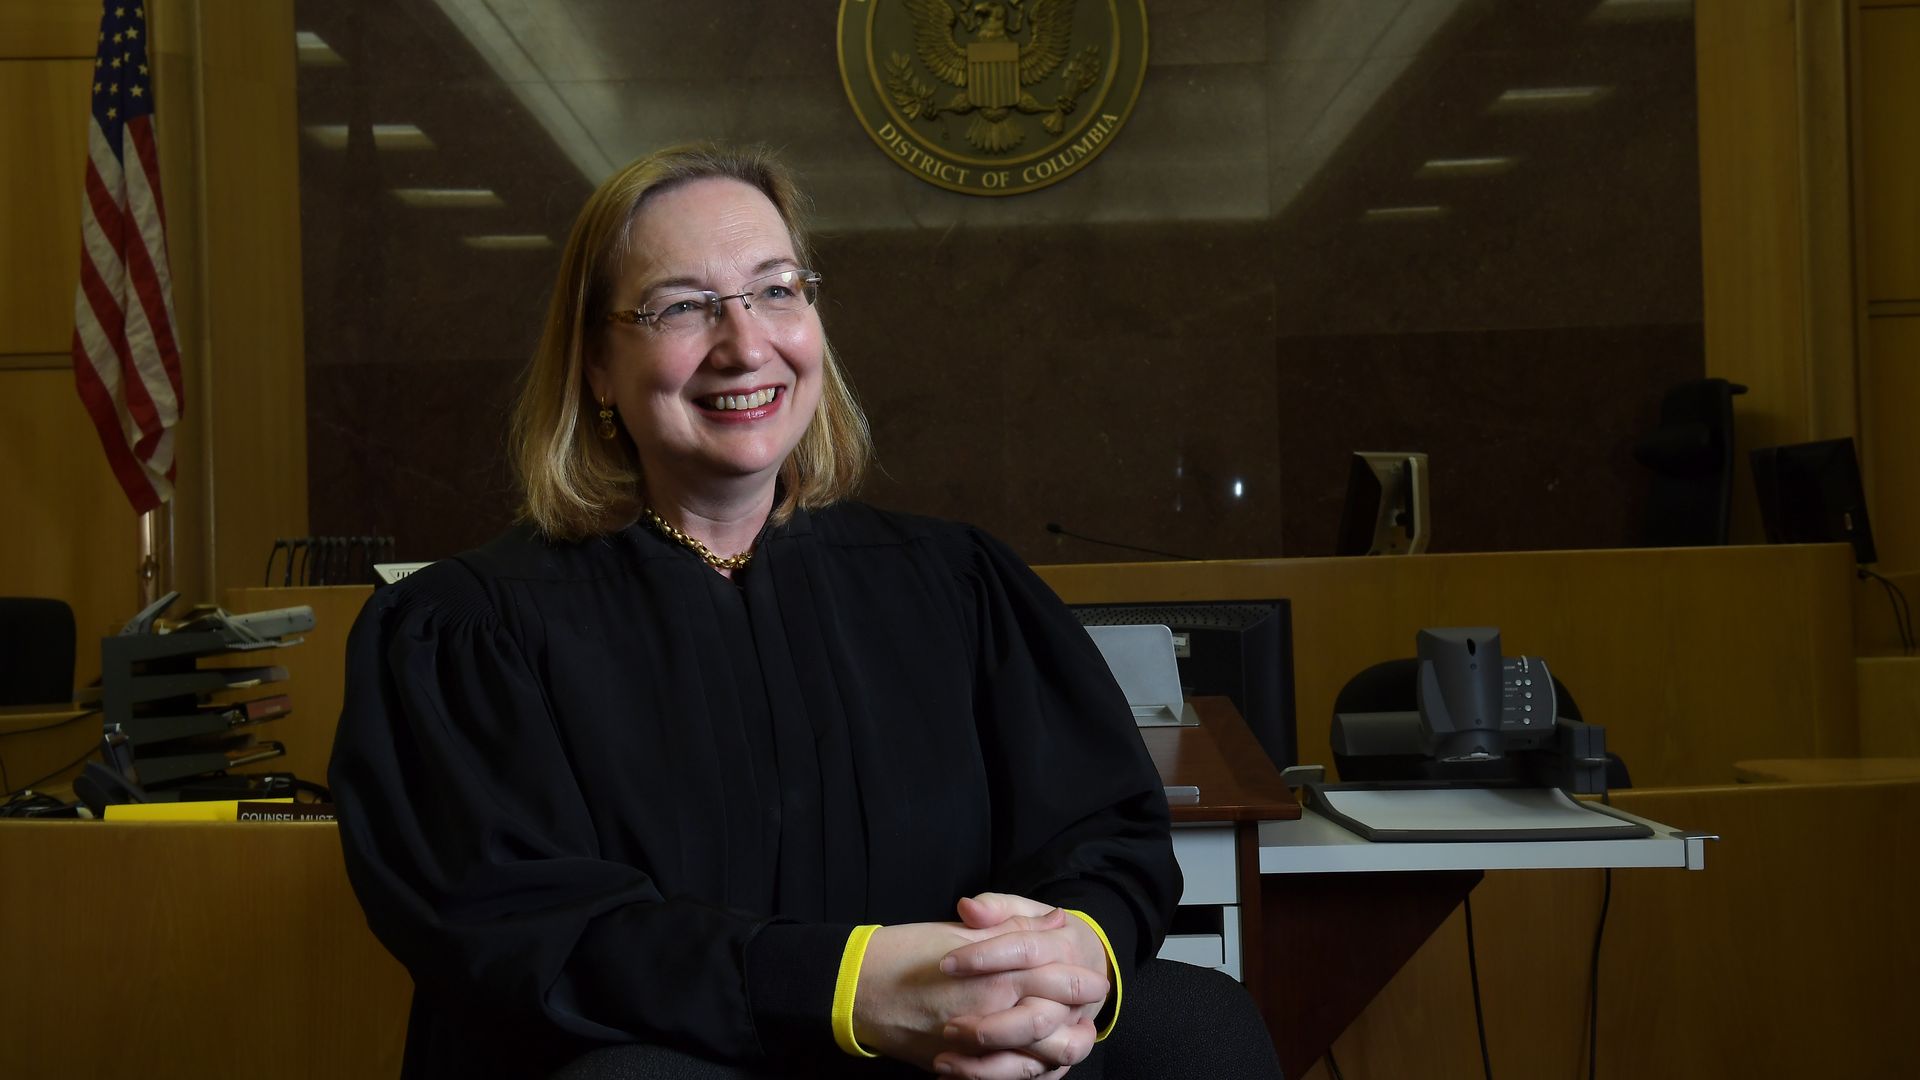 U.S. District Judge Beryl A. Howell poses for photographs in her court room May 05, 2016 in Washington, DC.